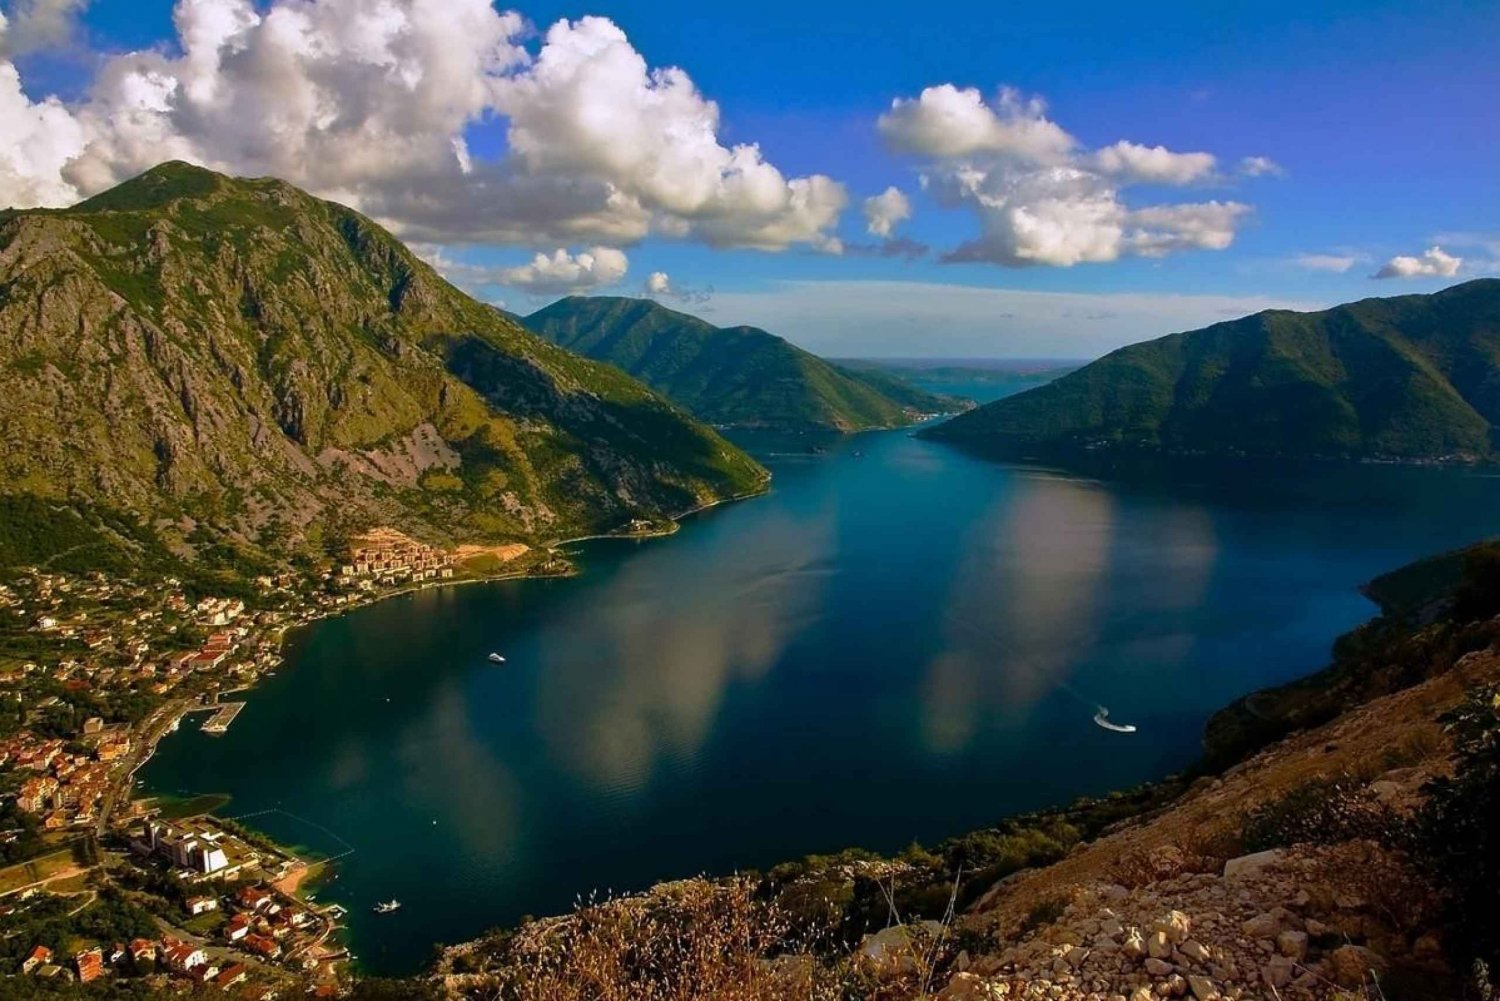 Montenegro & Bosnia 2 Countries in 1 Day Tour from Dubrovnik